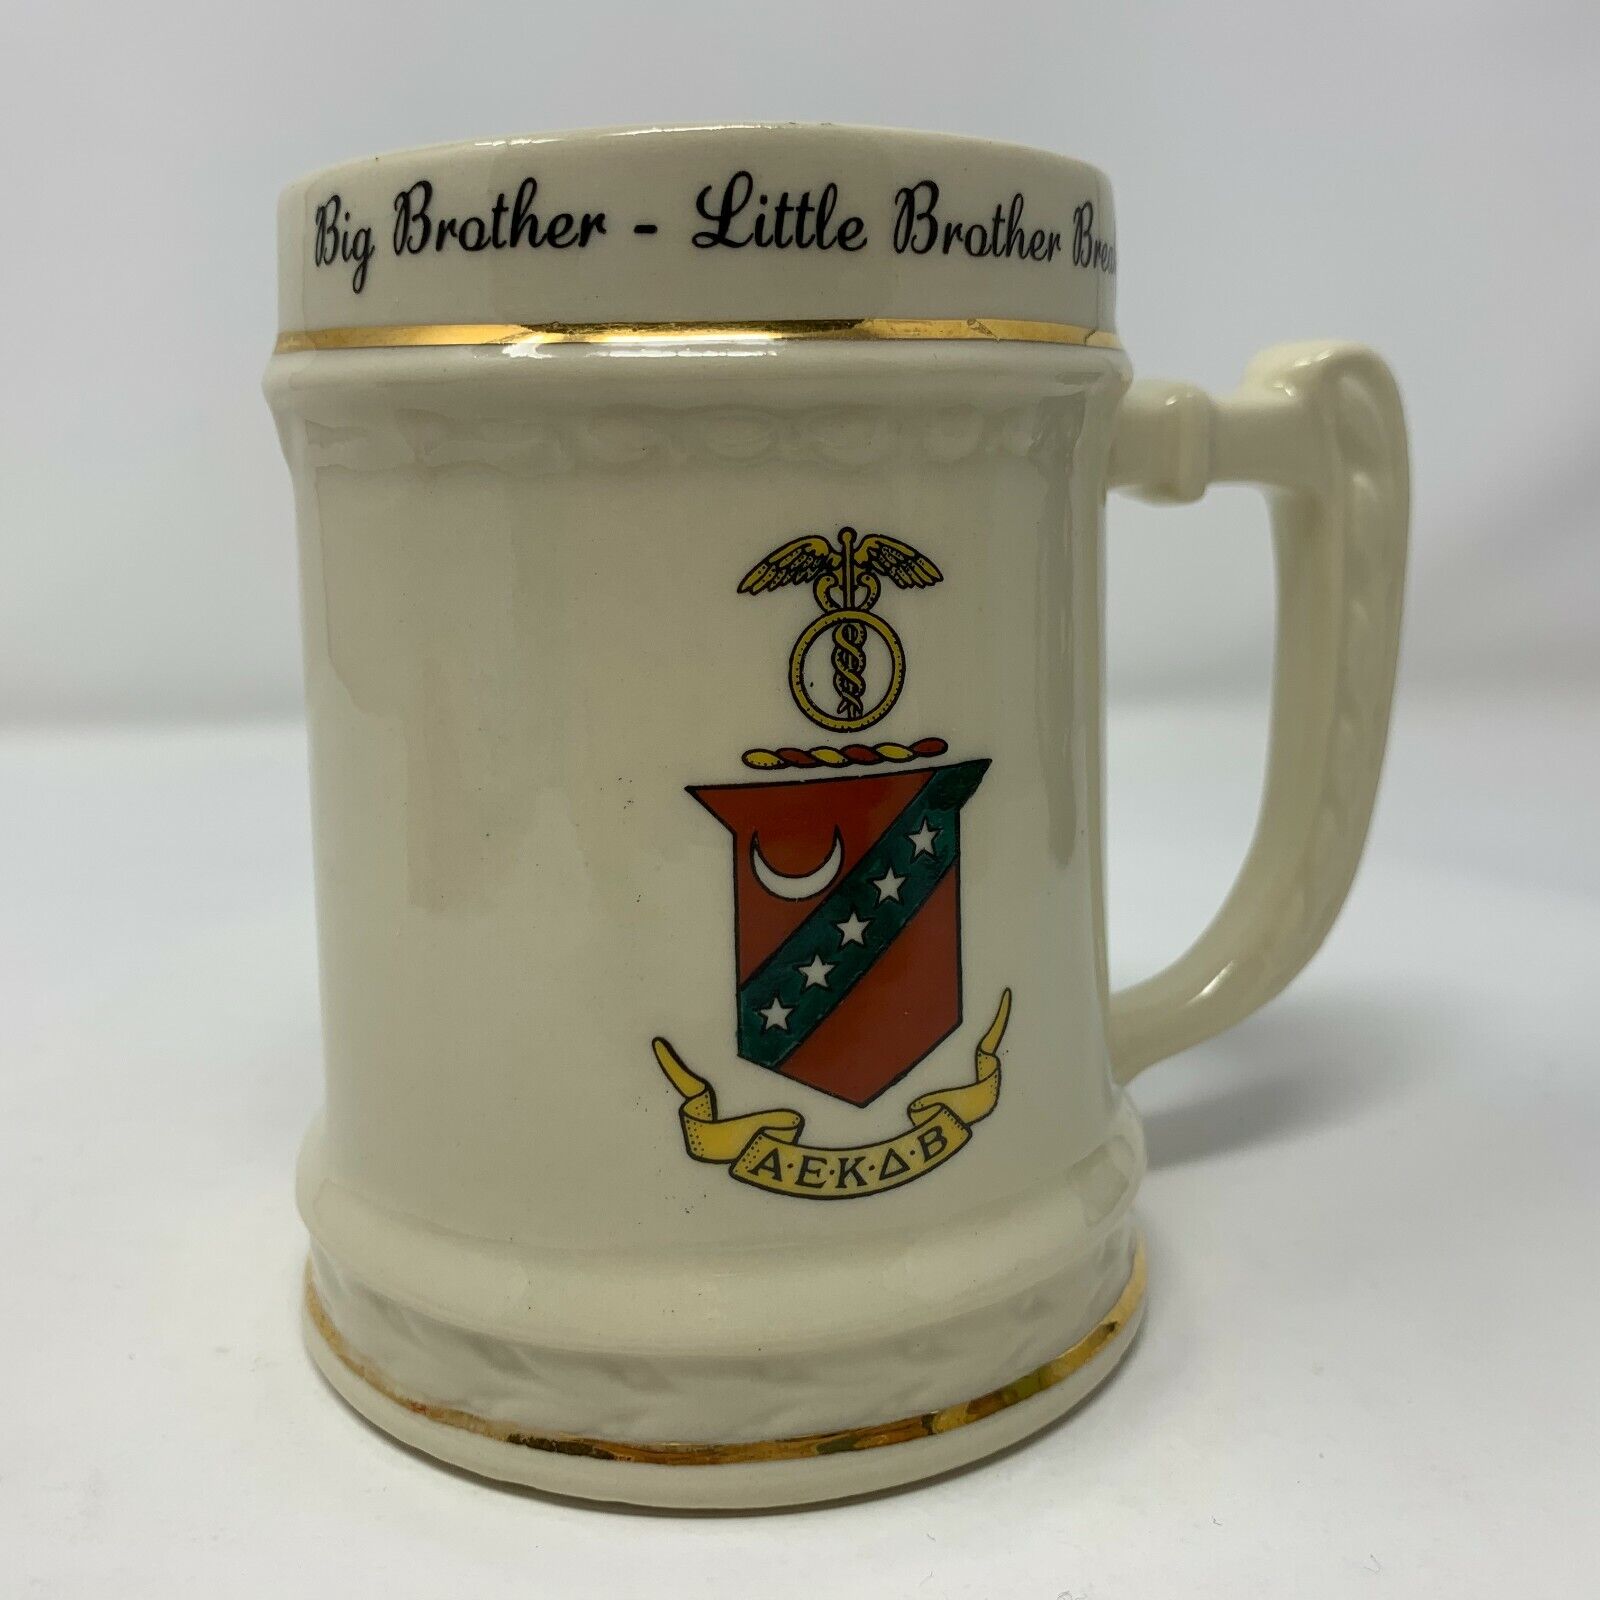 Big Brother Little Brother Breakfast Coffee Mug Cup Stein Balfour Ceramic BBBS